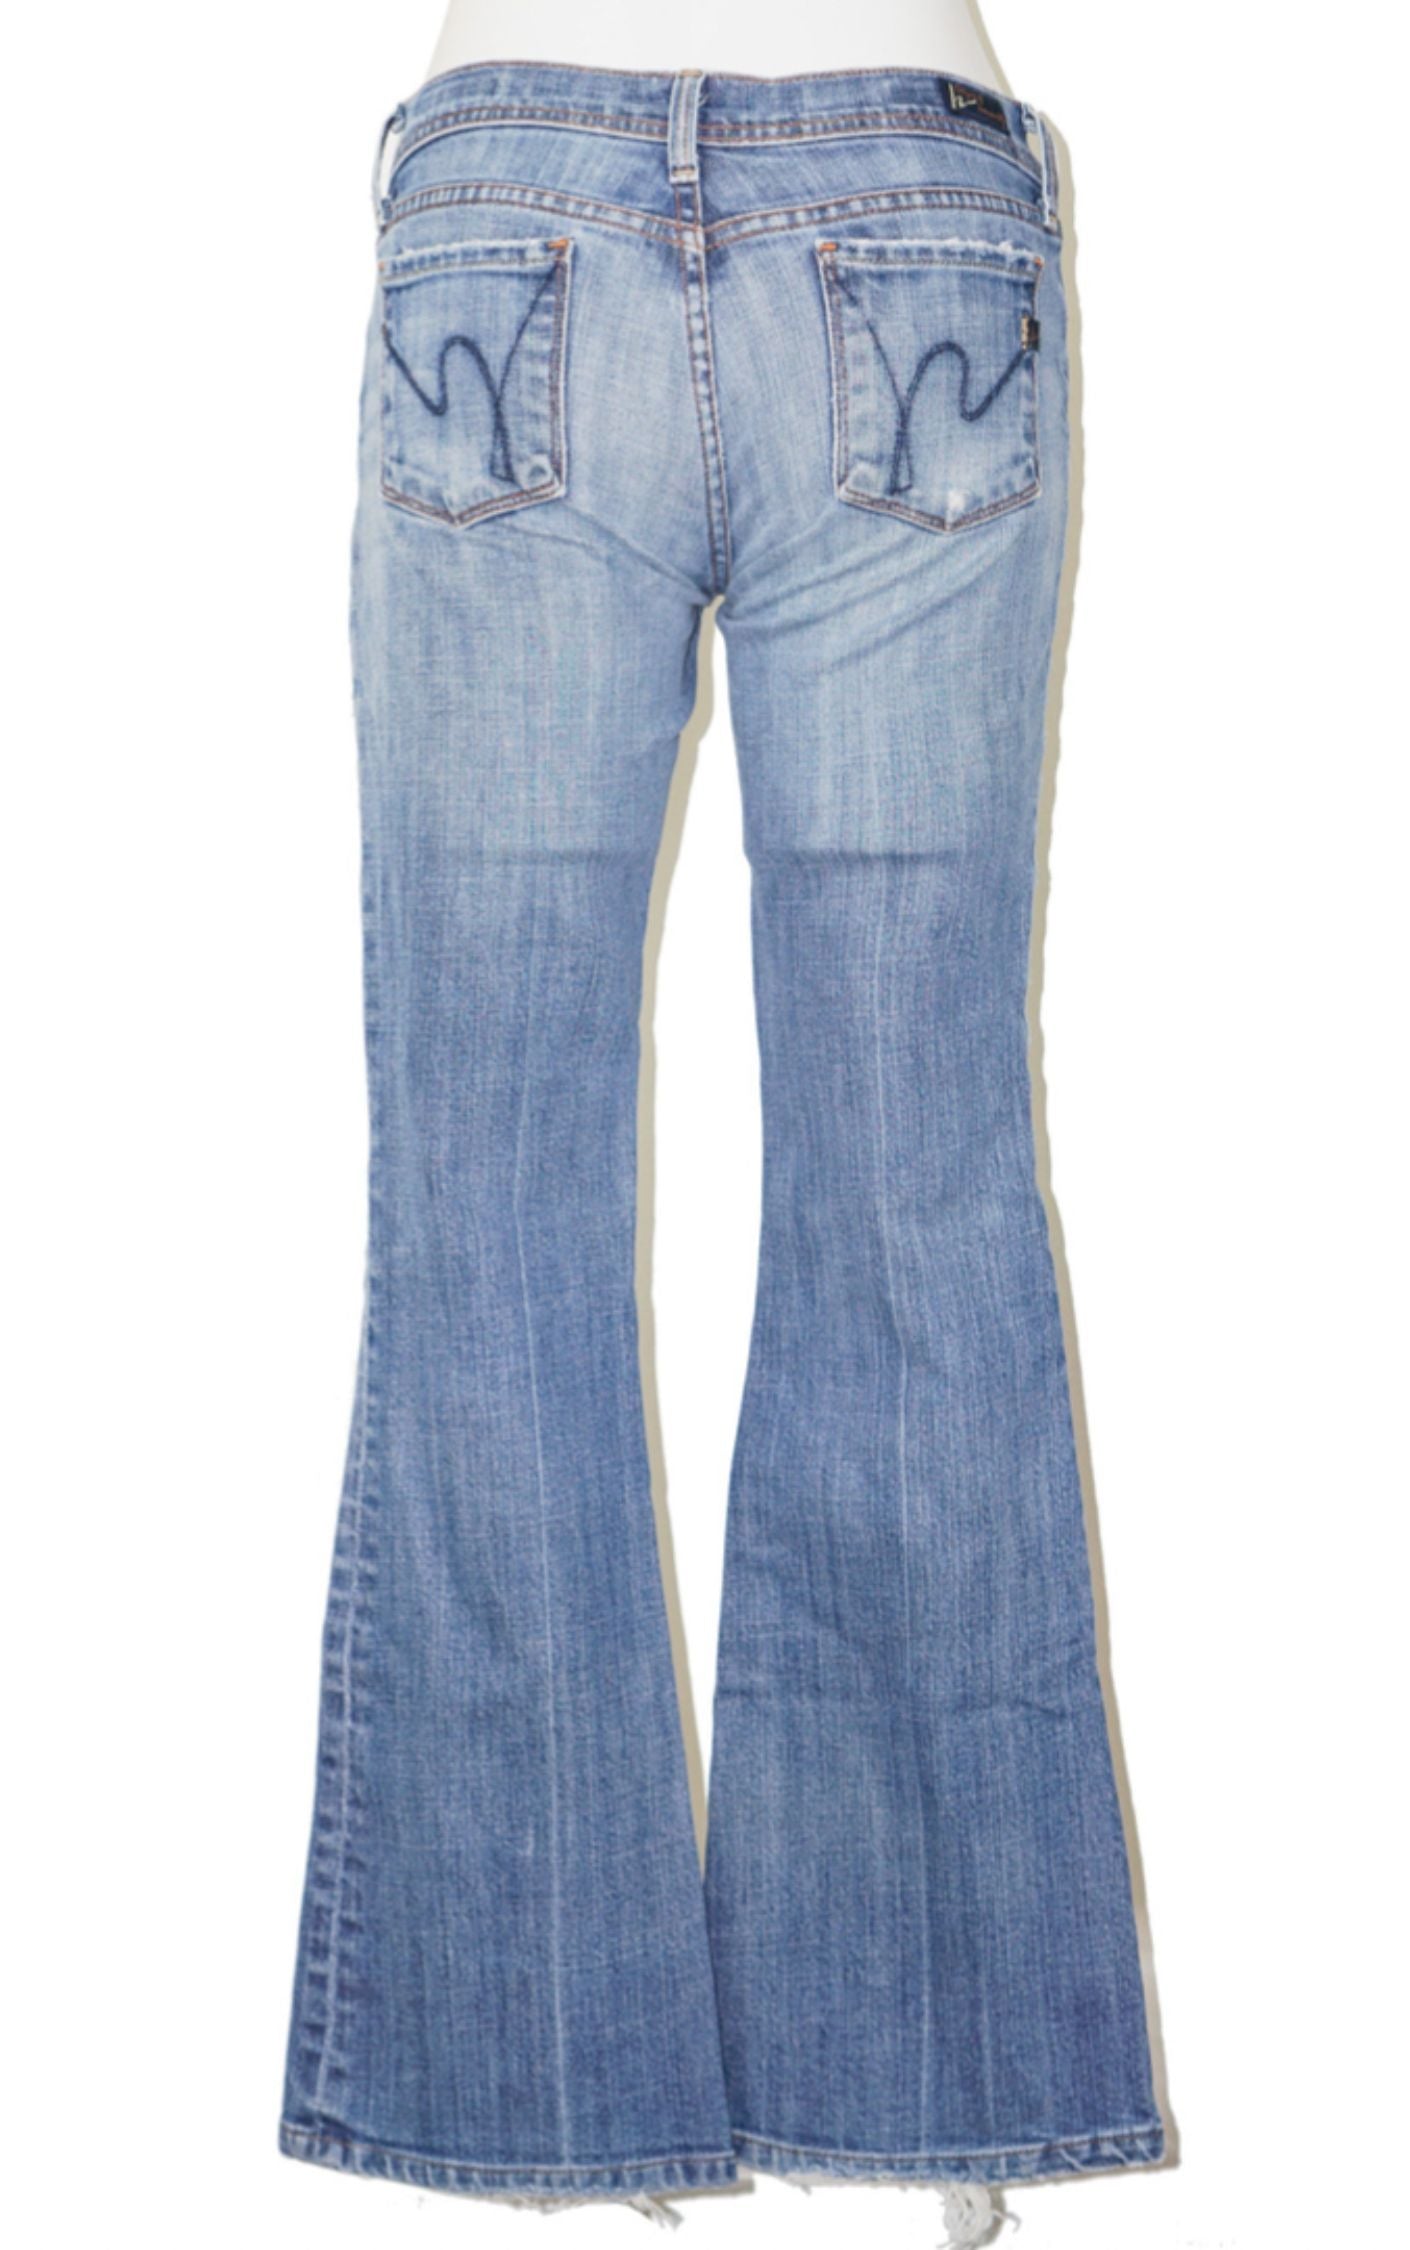 CITIZENS OF HUMANITY Flared Bootcut Jeans resellum